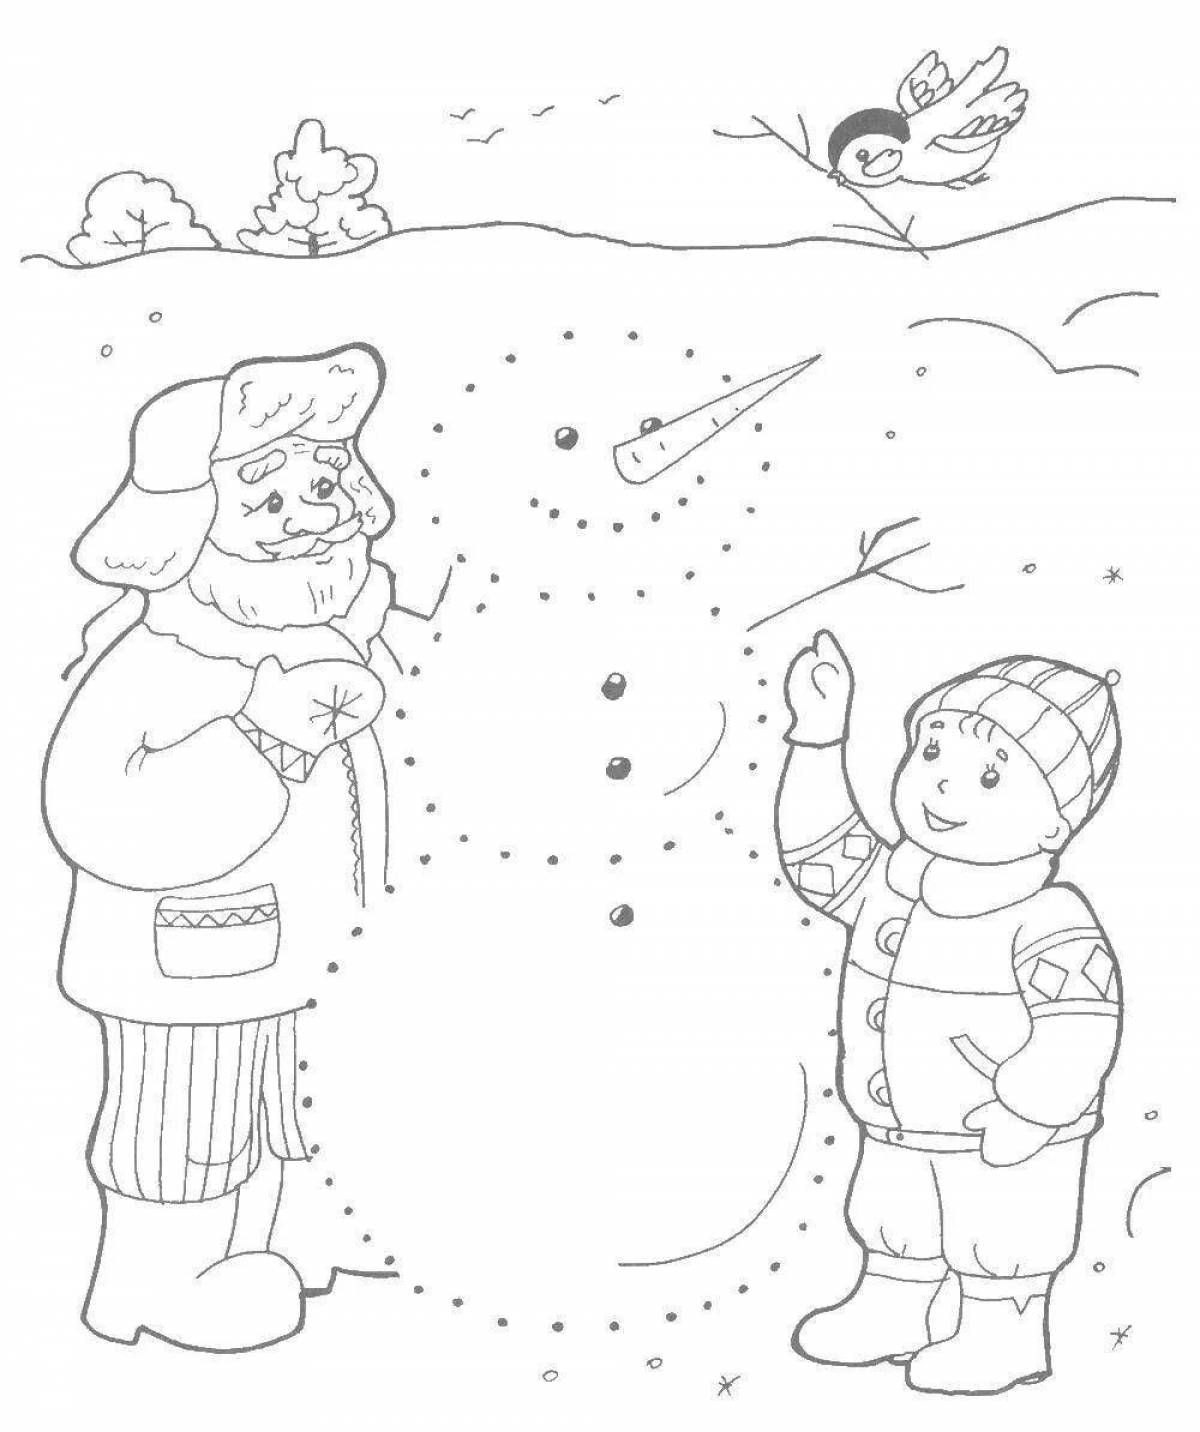 Violent winter coloring book for children 6-7 years old